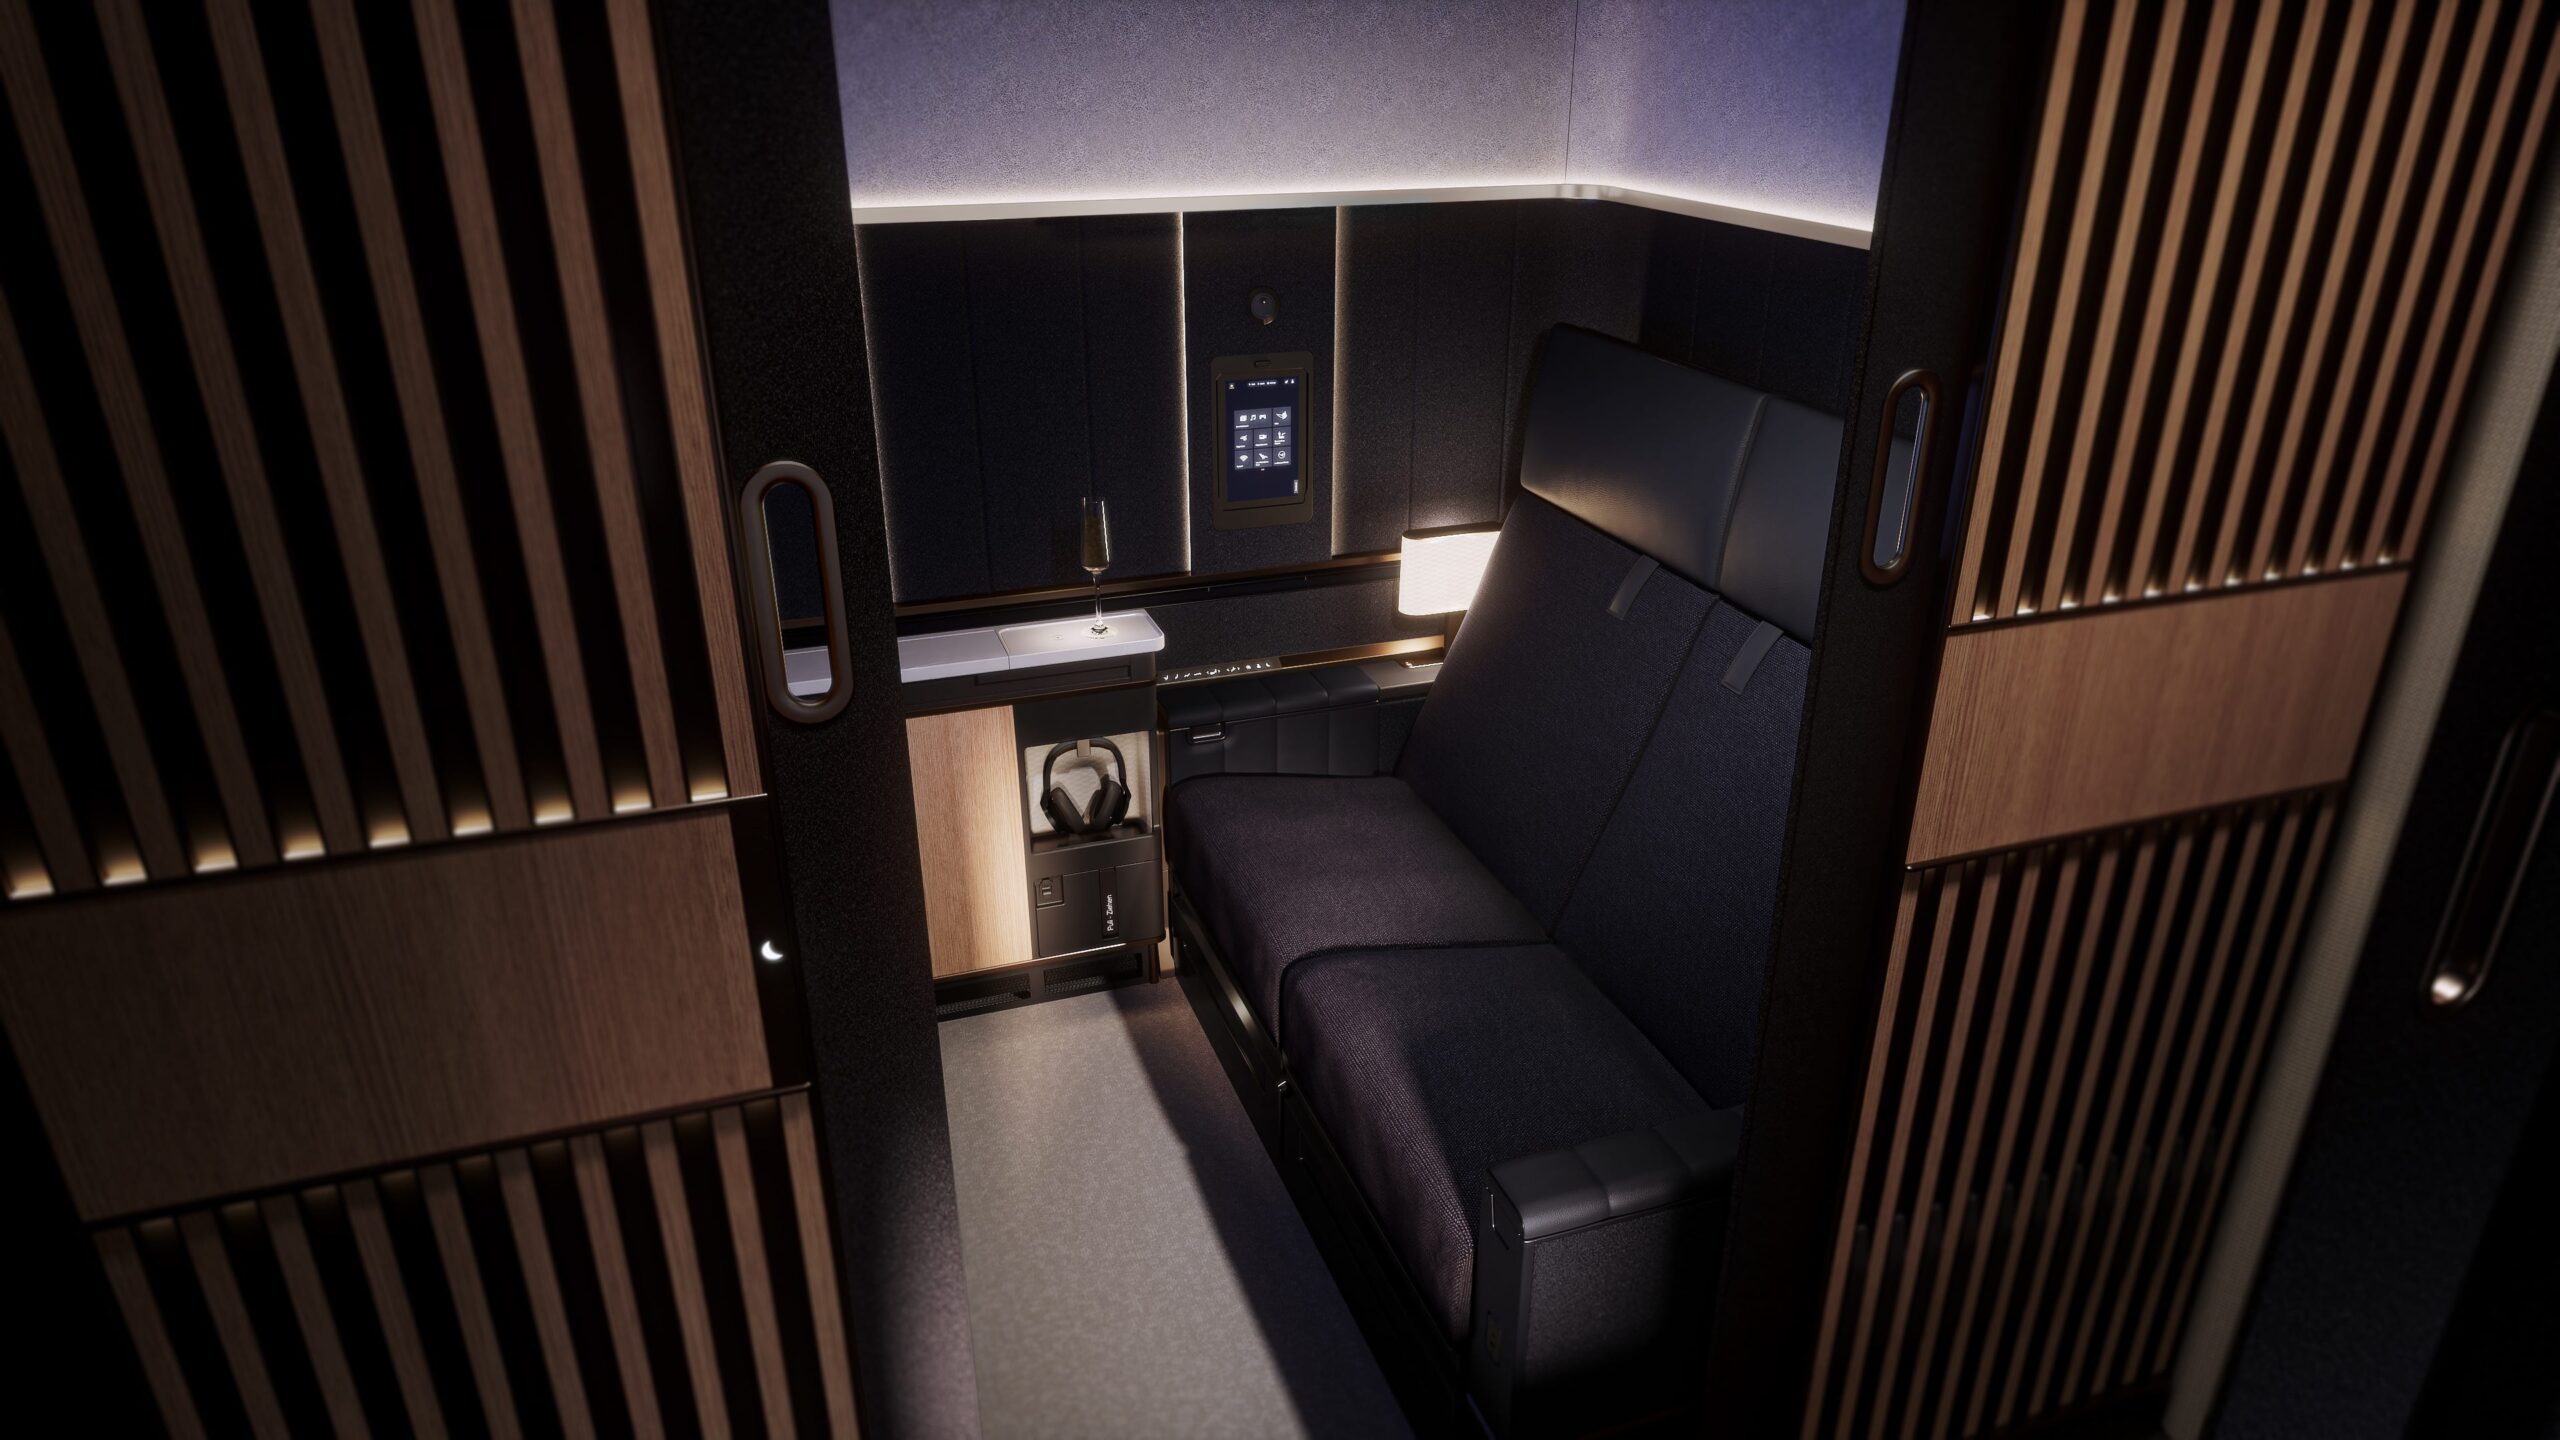 Lufthansa new Allegris first-class suites: Interior photo showing the seating